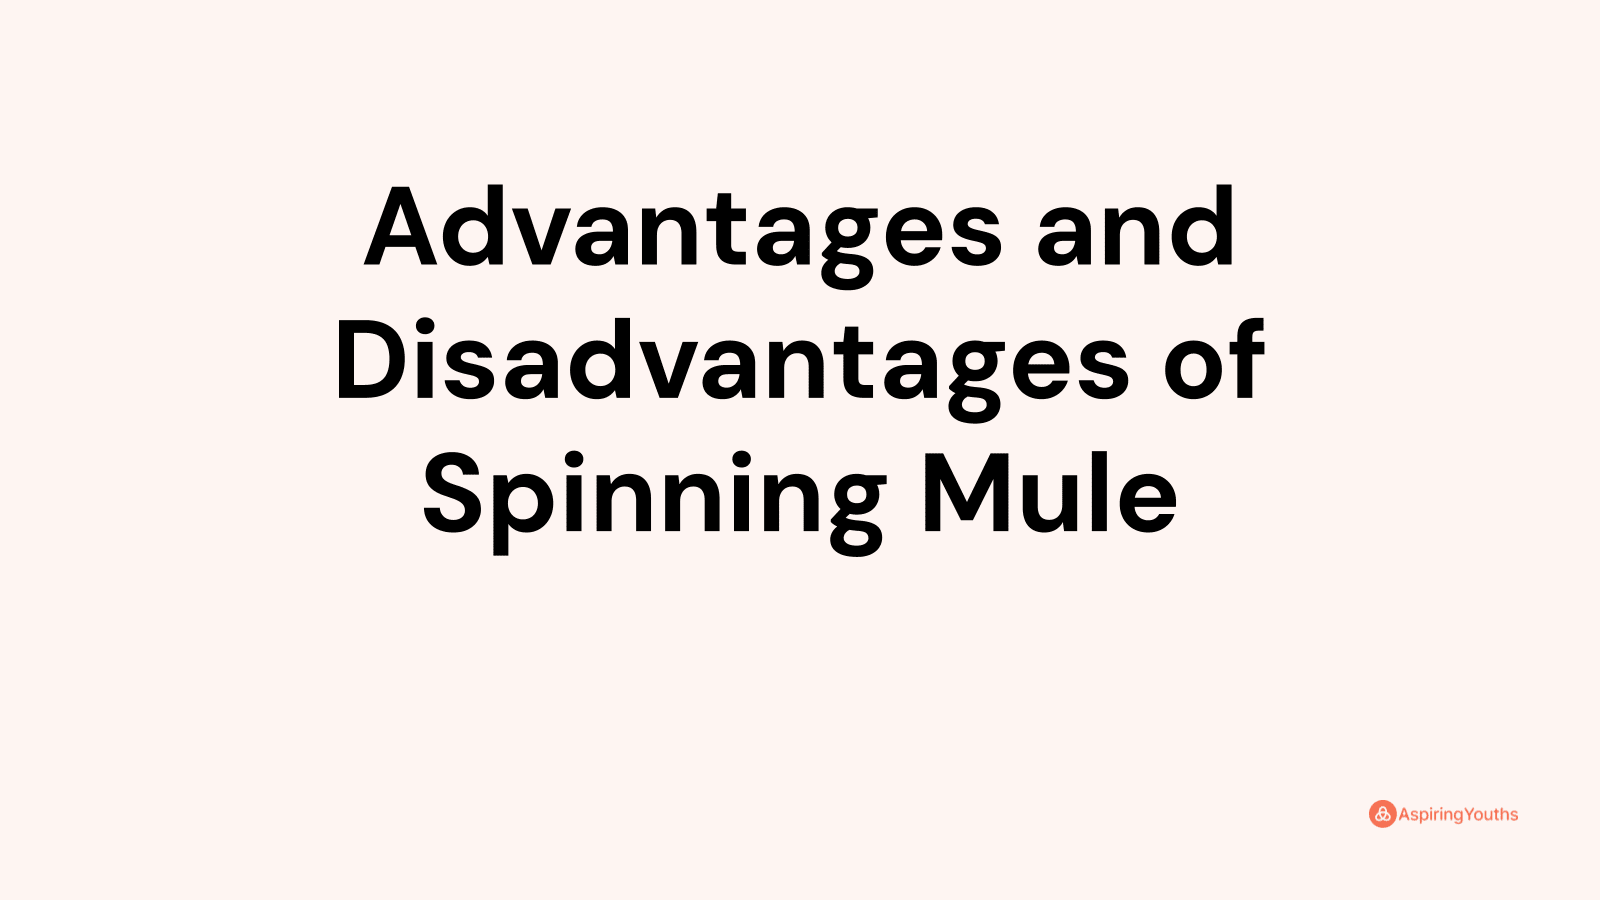 Advantages and disadvantages of Spinning Mule